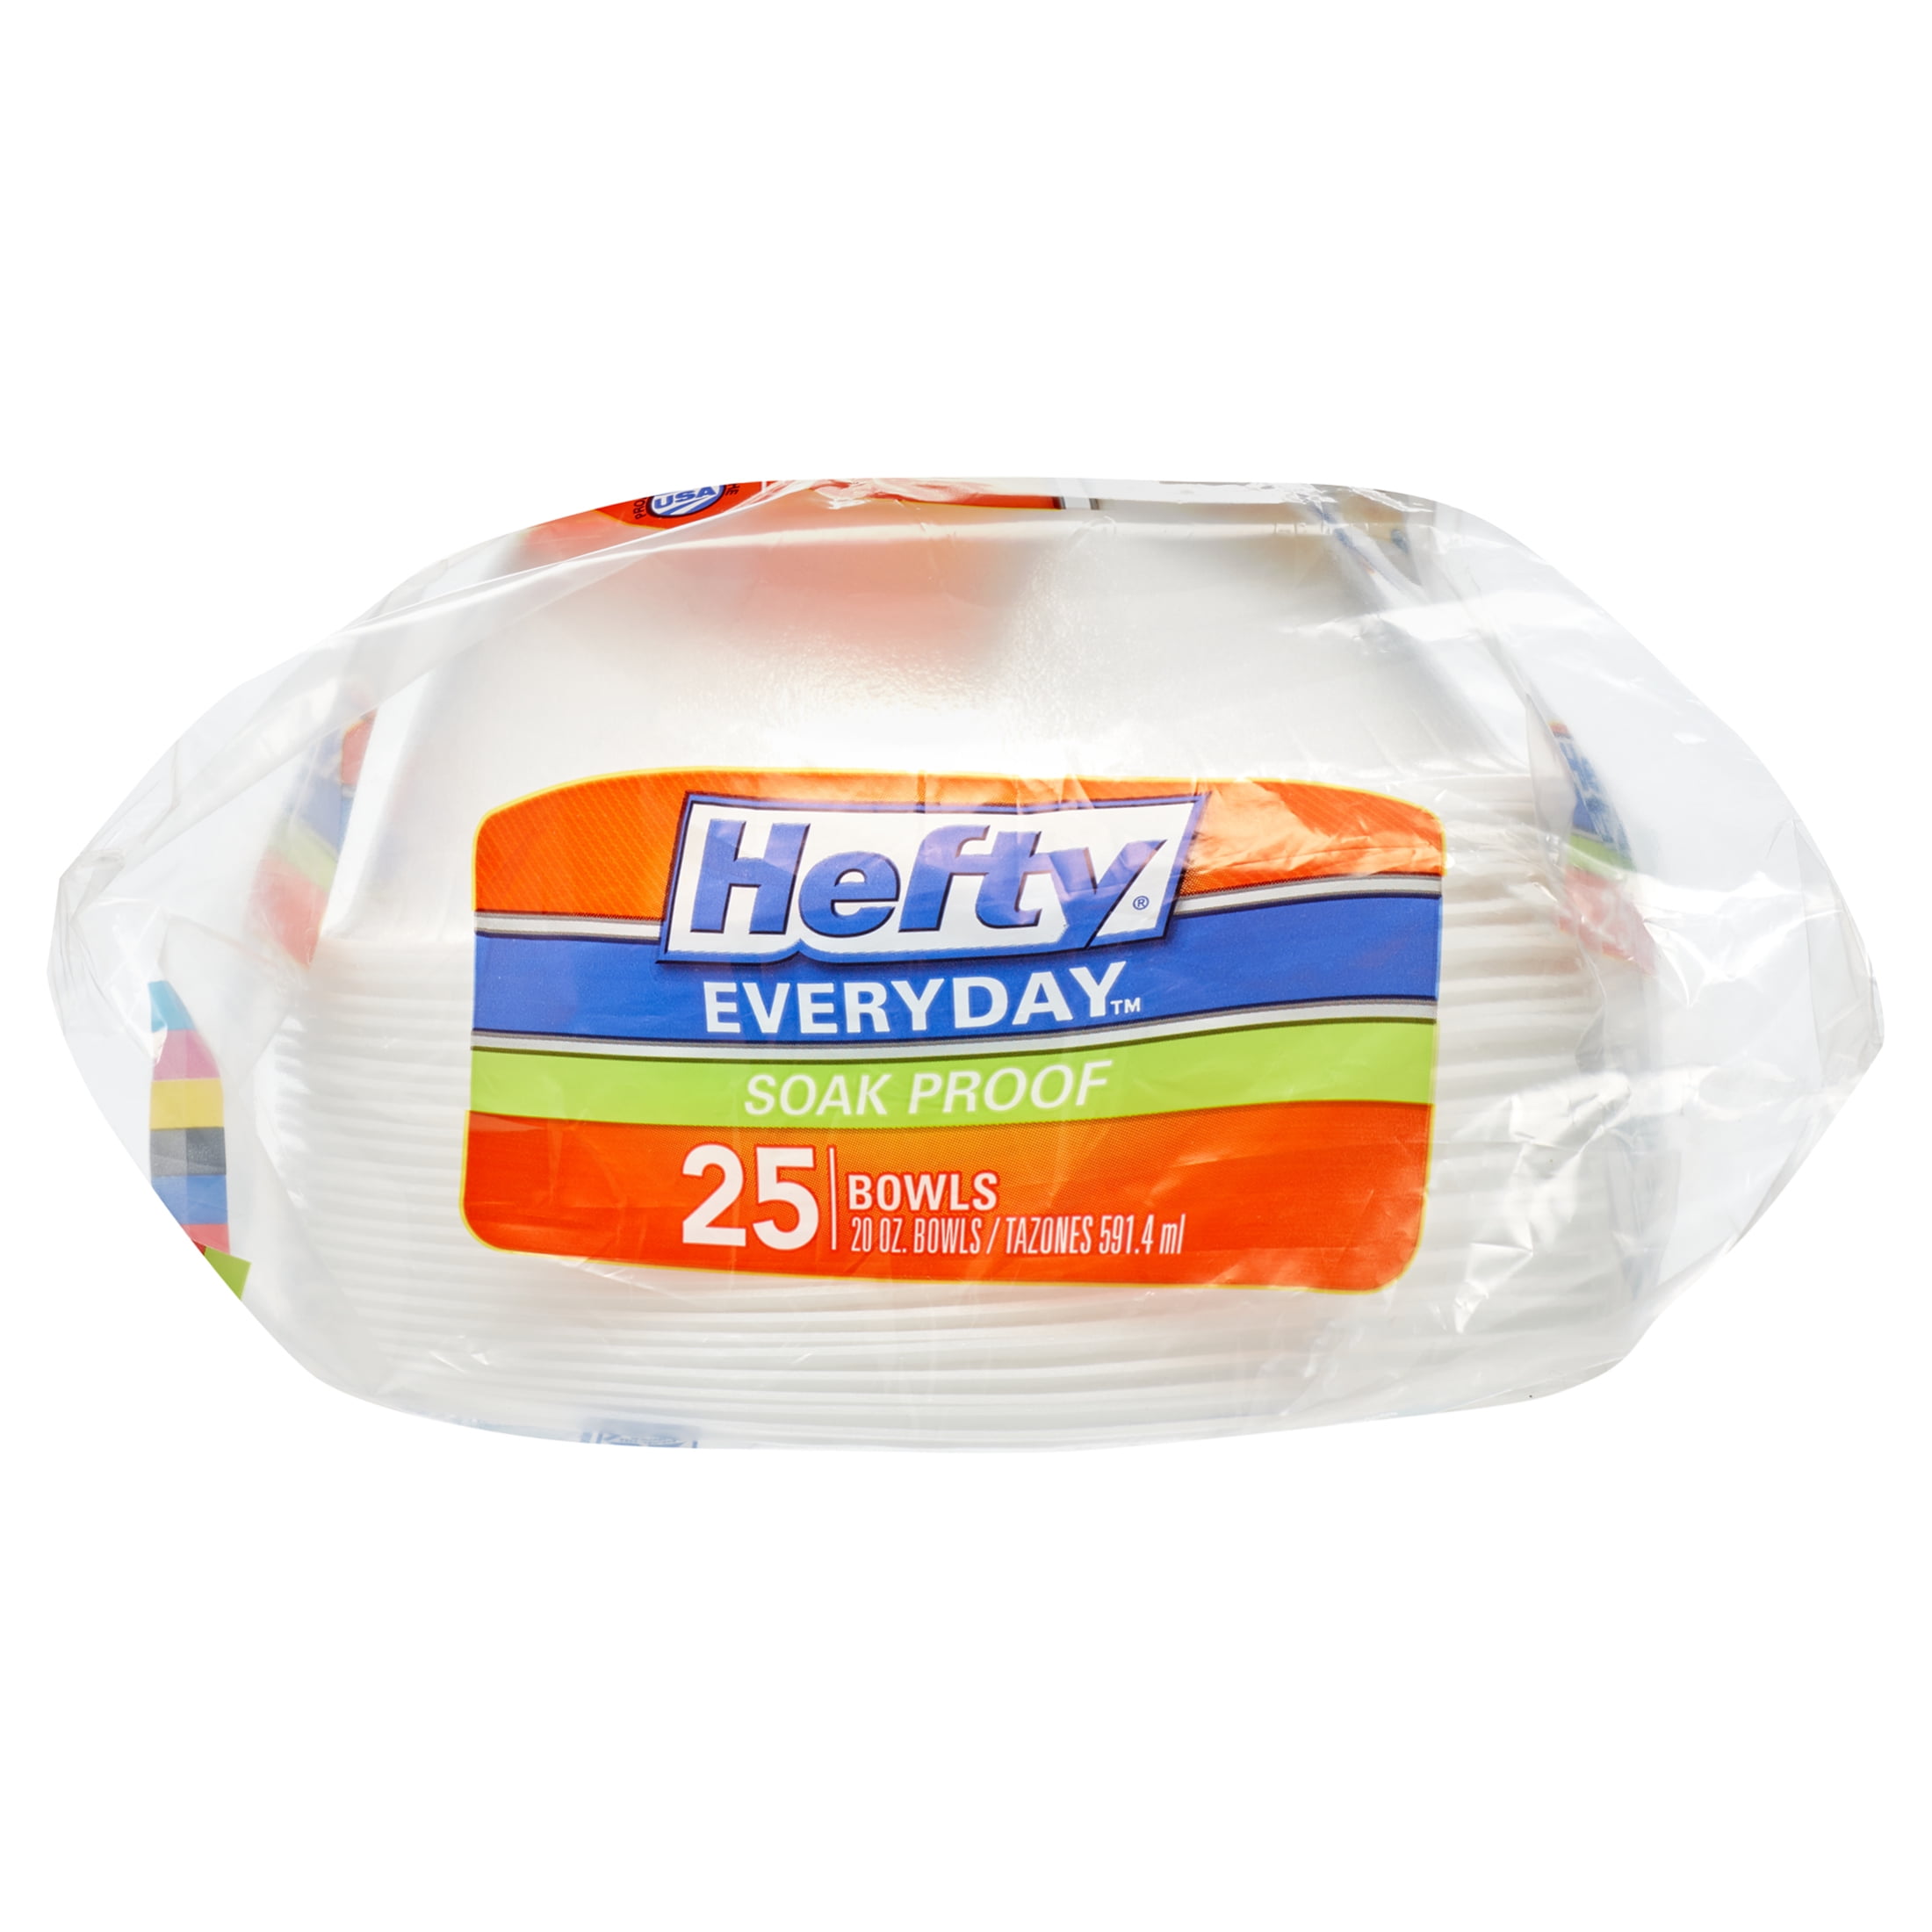  Hefty Soak Proof Bowls 50-Count Only $1.59 Shipped